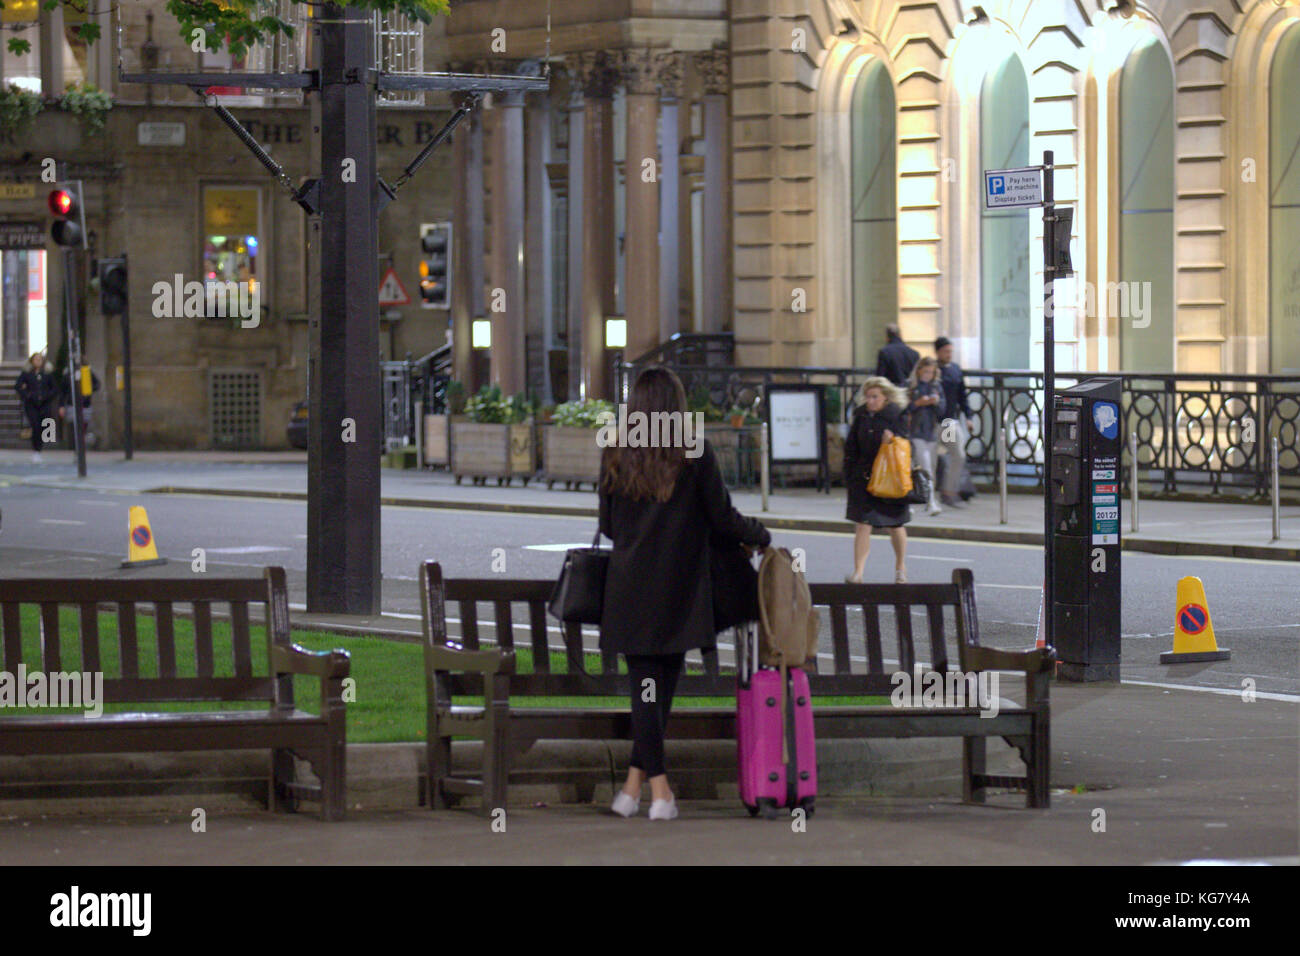 girl woman  on phone waiting for her friend tourist with cases and bags viewed from behind George Square, Glasgow, Glasgow City, United Kingdom Stock Photo